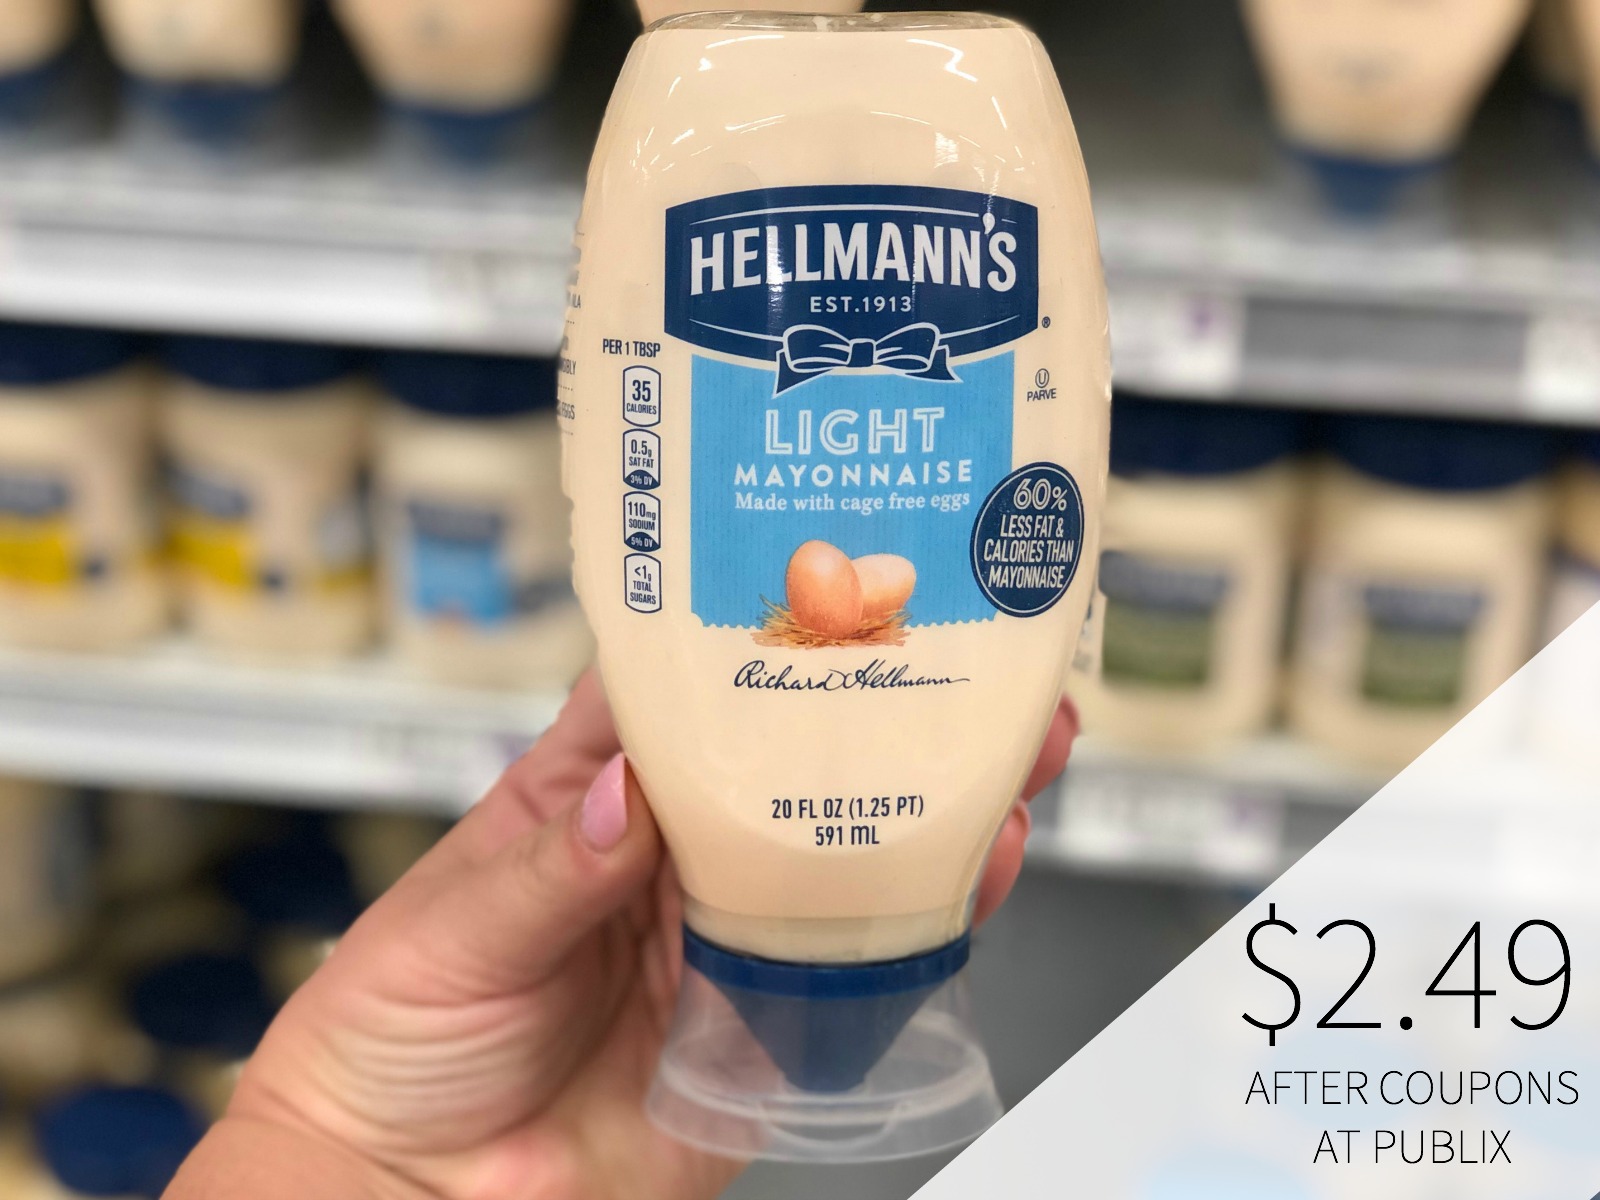 Last Chance For A Big Discount On Hellmann’s Mayonnaise At Publix (Deal Valid Through 4/26)